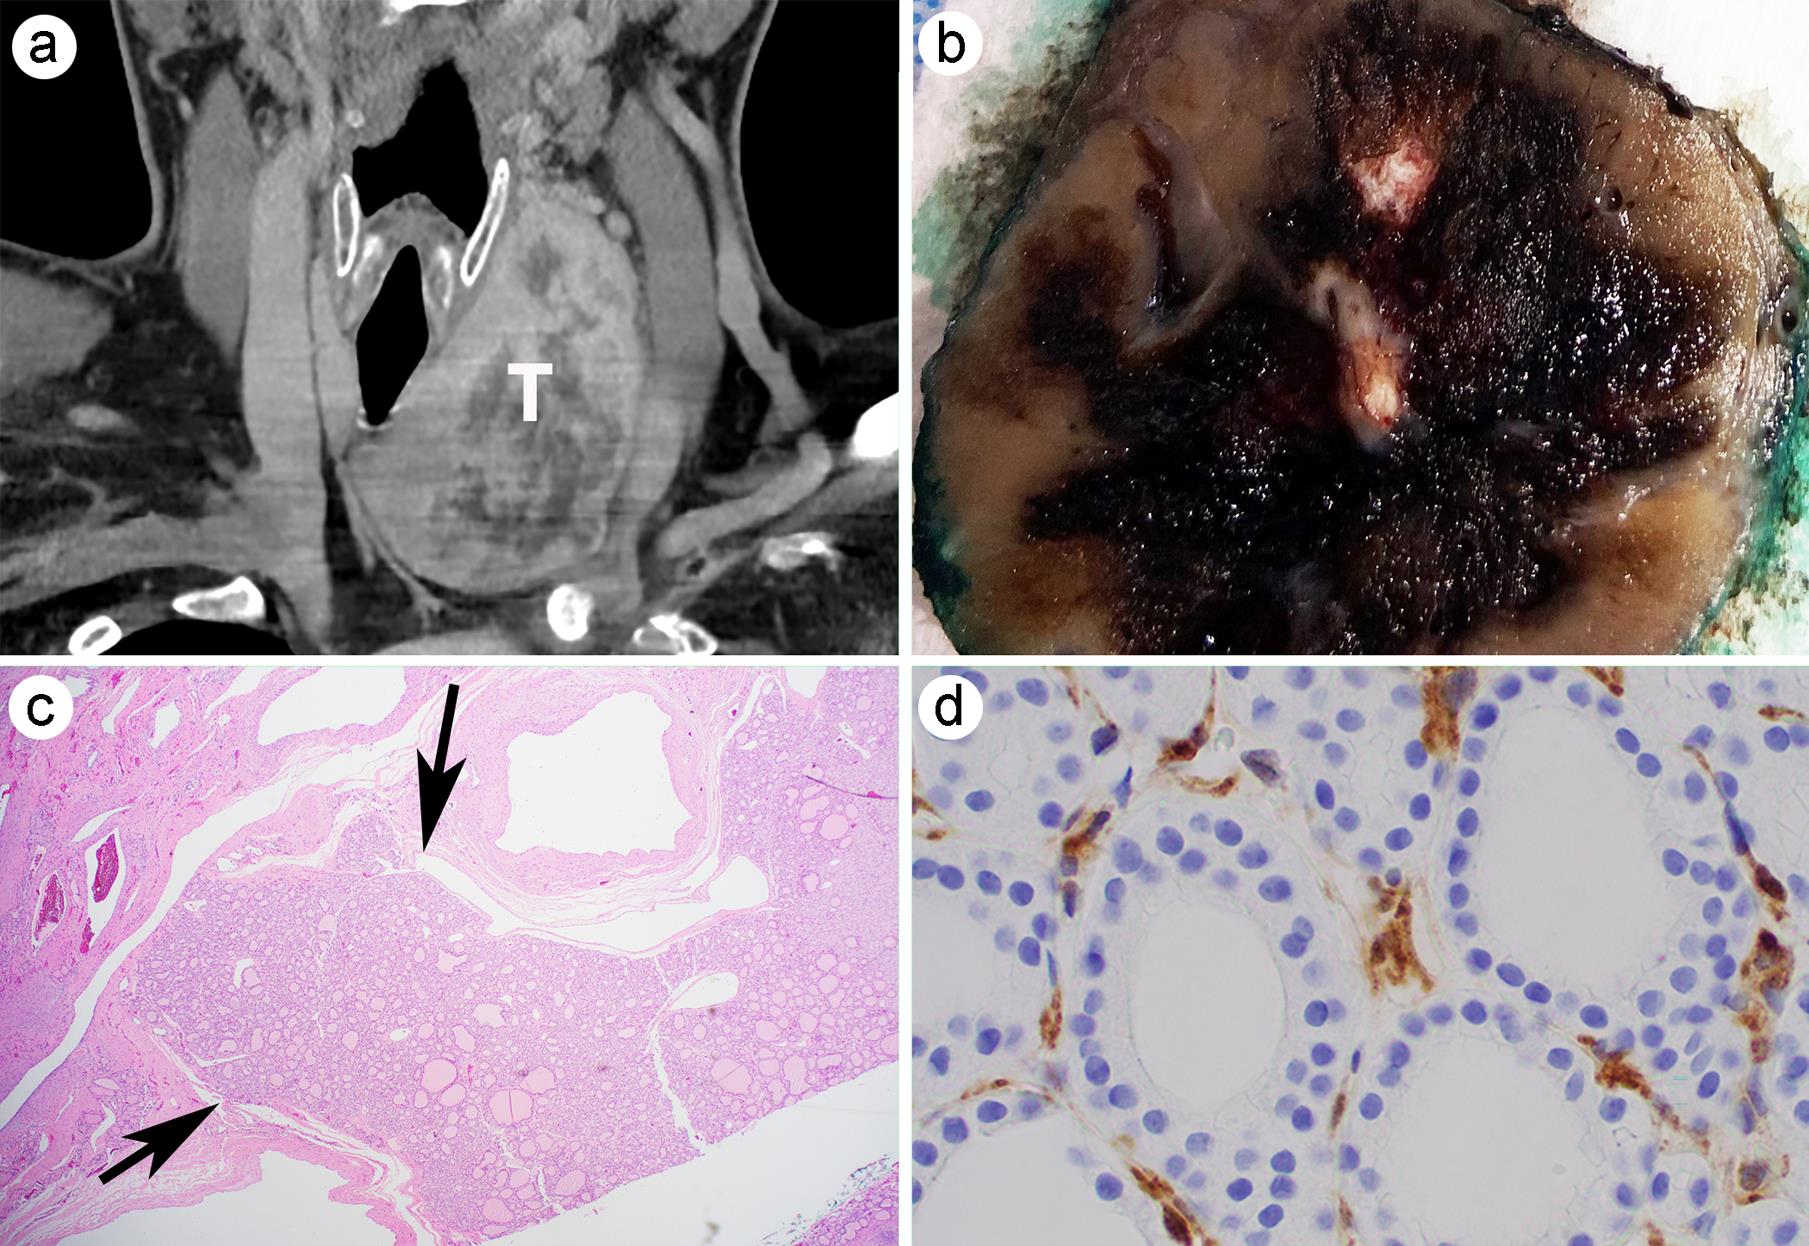 Follicular thyroid carcinoma (FTC) with loss of PTEN.